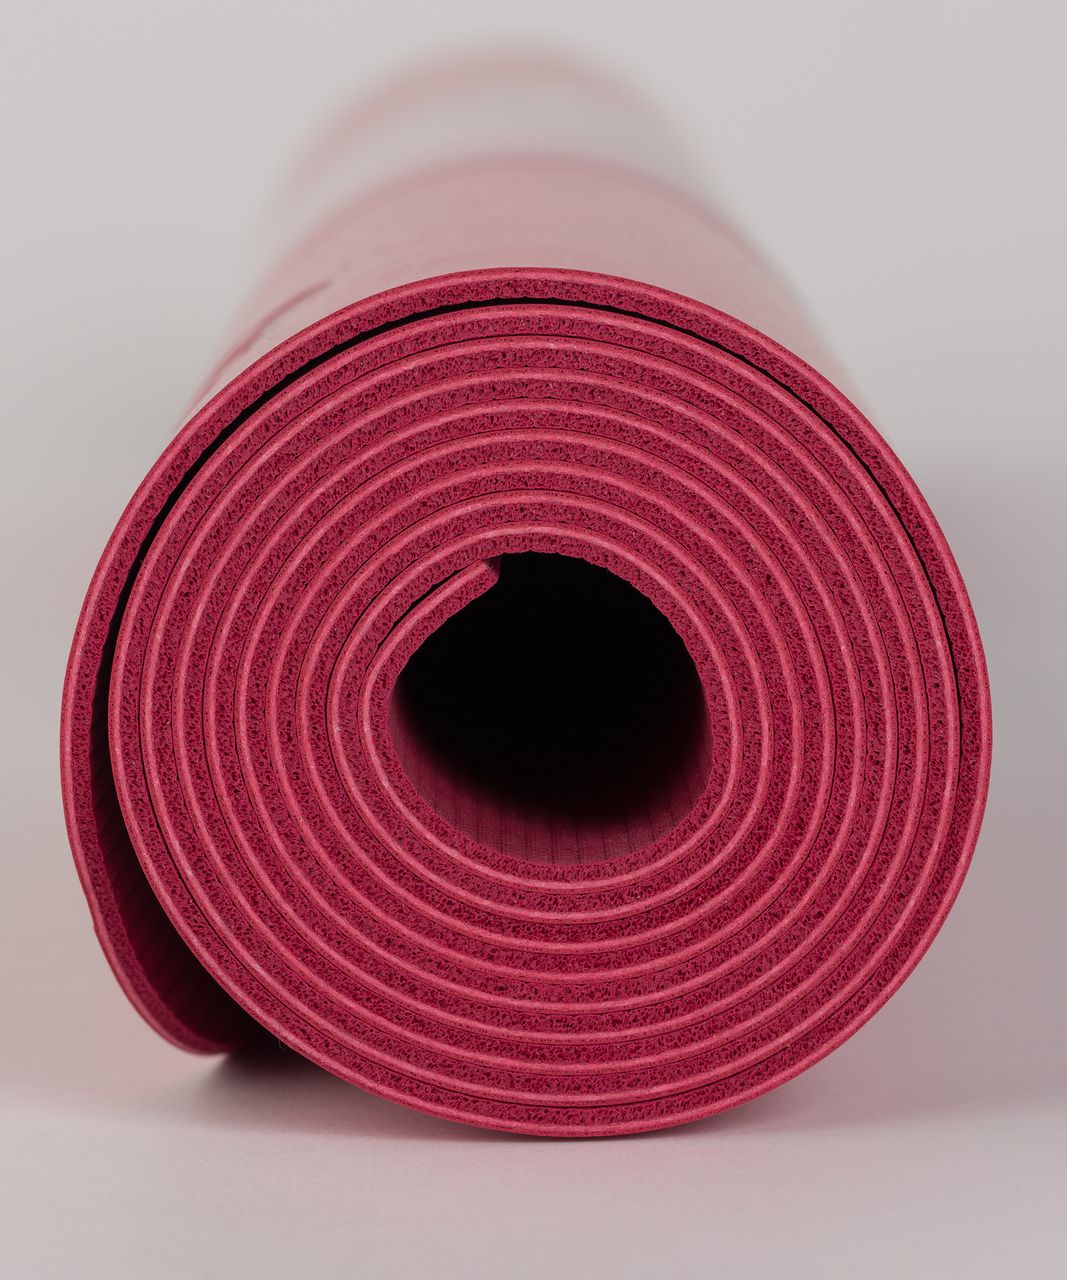 Lululemon The Reversible Mat 3mm - Lip Gloss / Ruby Red / Ruby Red